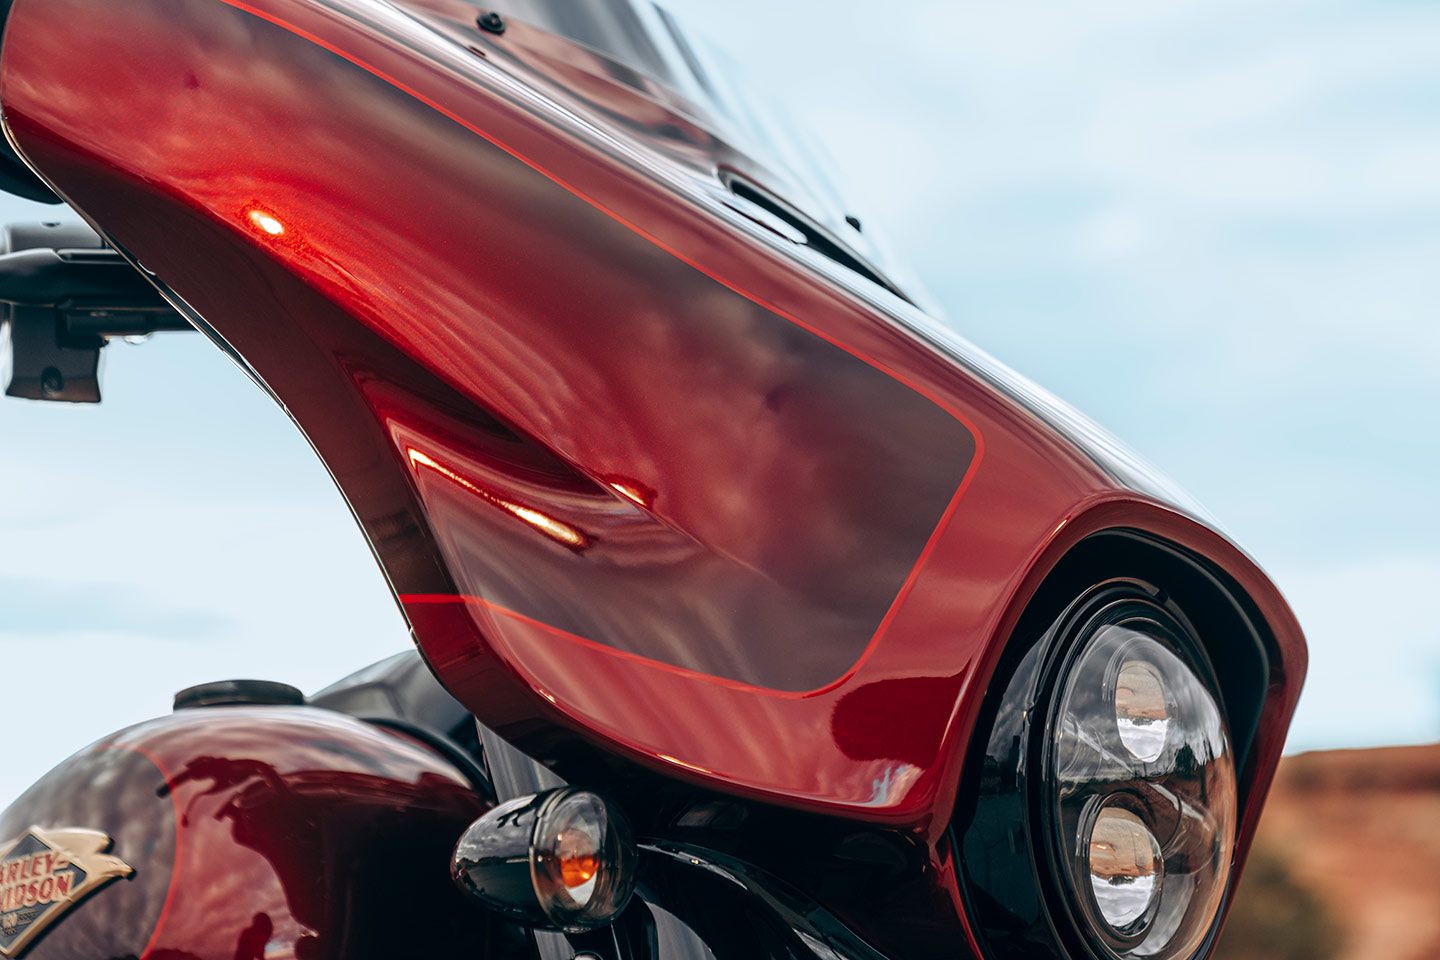 The batwing fairing is a key part of the Street Glide Special’s visual signature, and delivers more wind protection than you might expect.